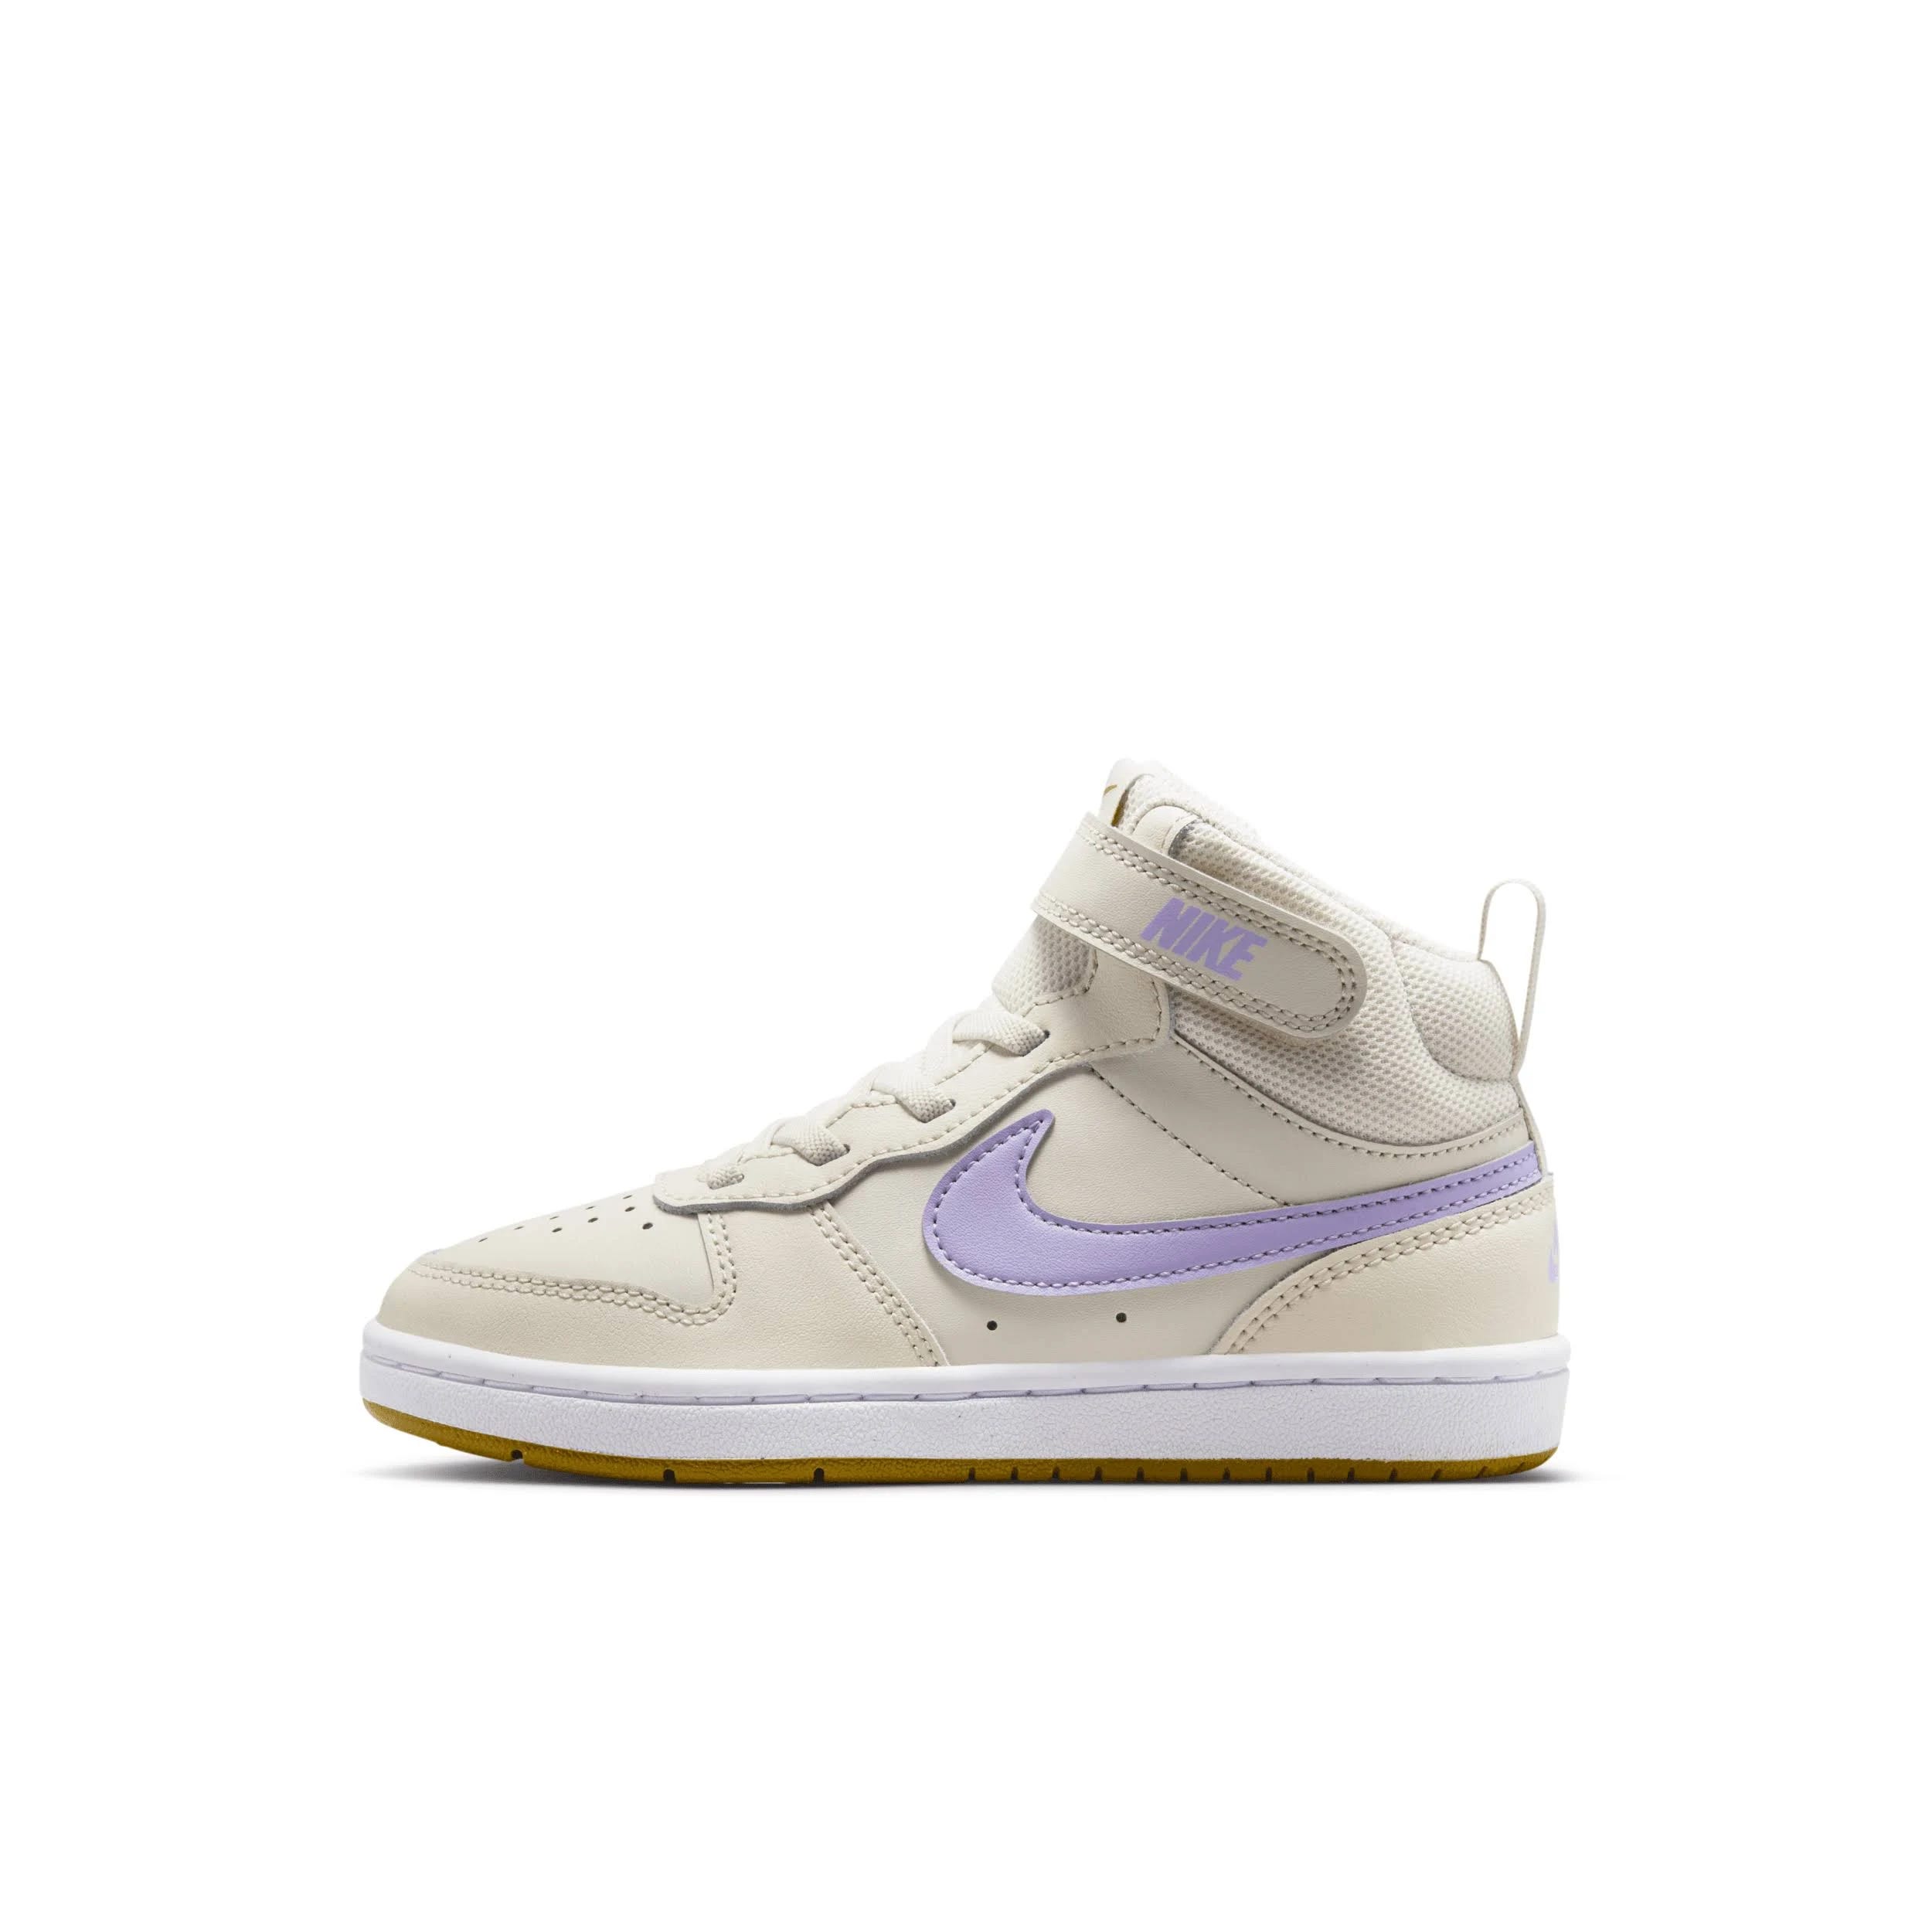 Kids' Nike Court Borough 2 High Top Sneakers - All-Star Comfort | Image